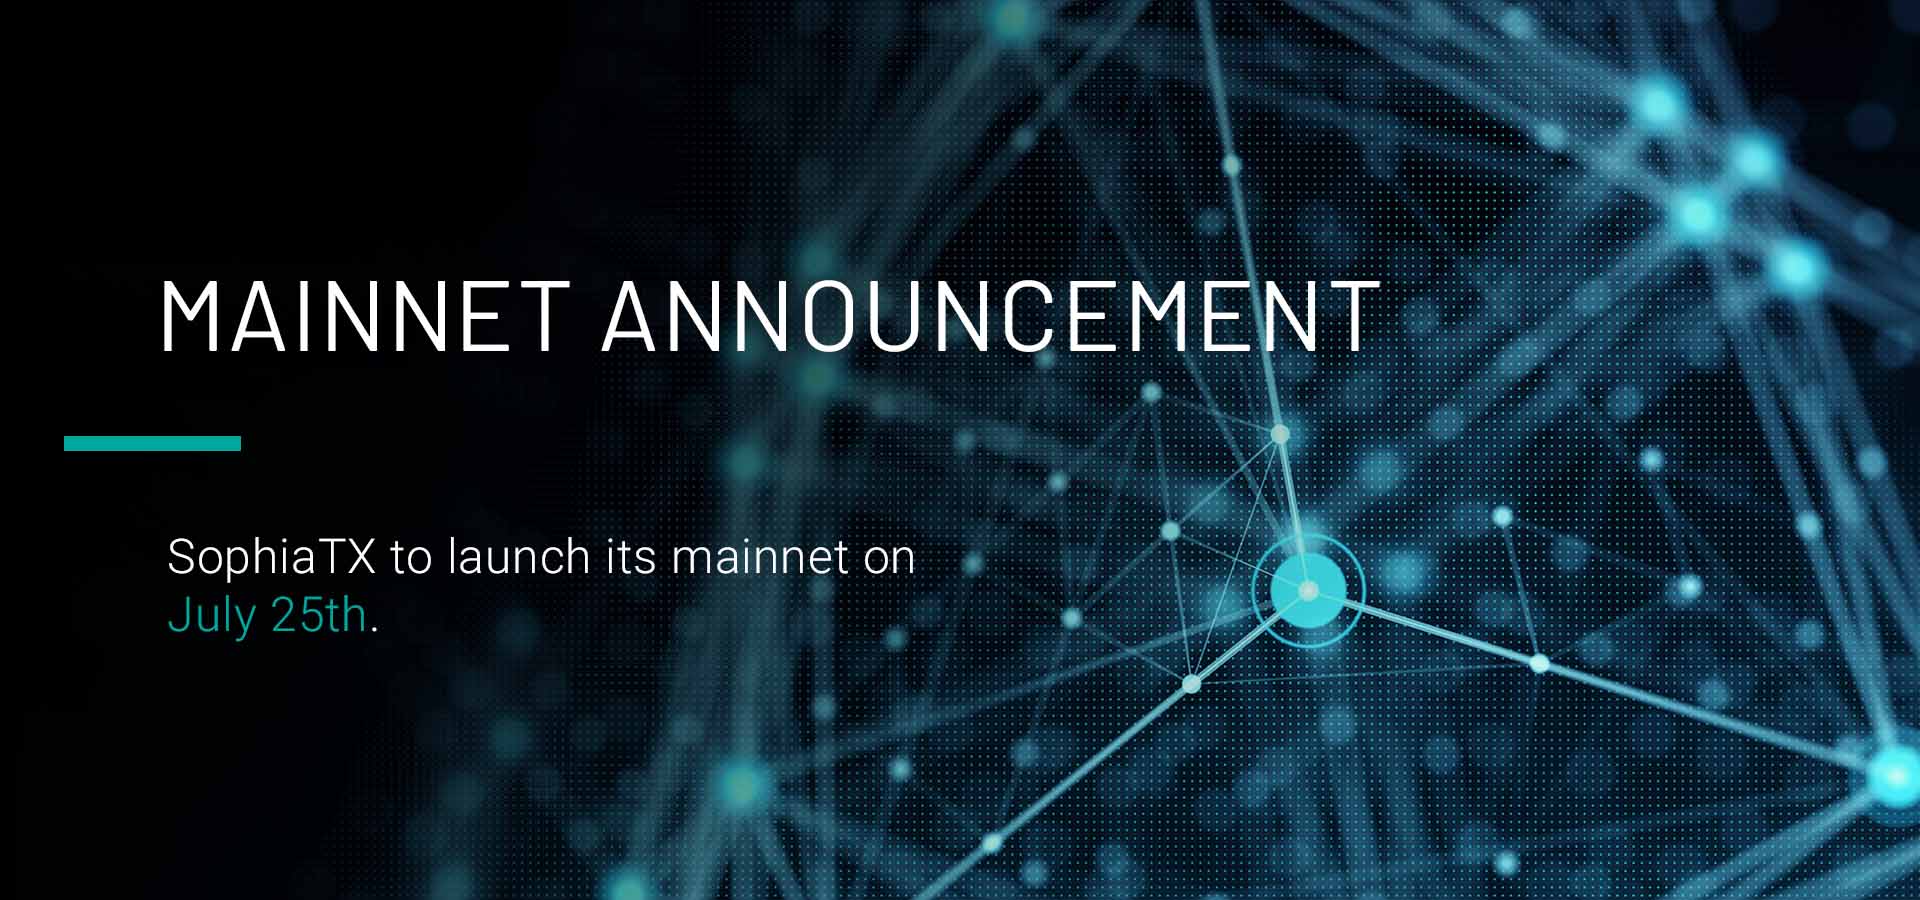 SophiaTX to Launch Its Mainnet on July 25, Gears up for Further Business Adoption